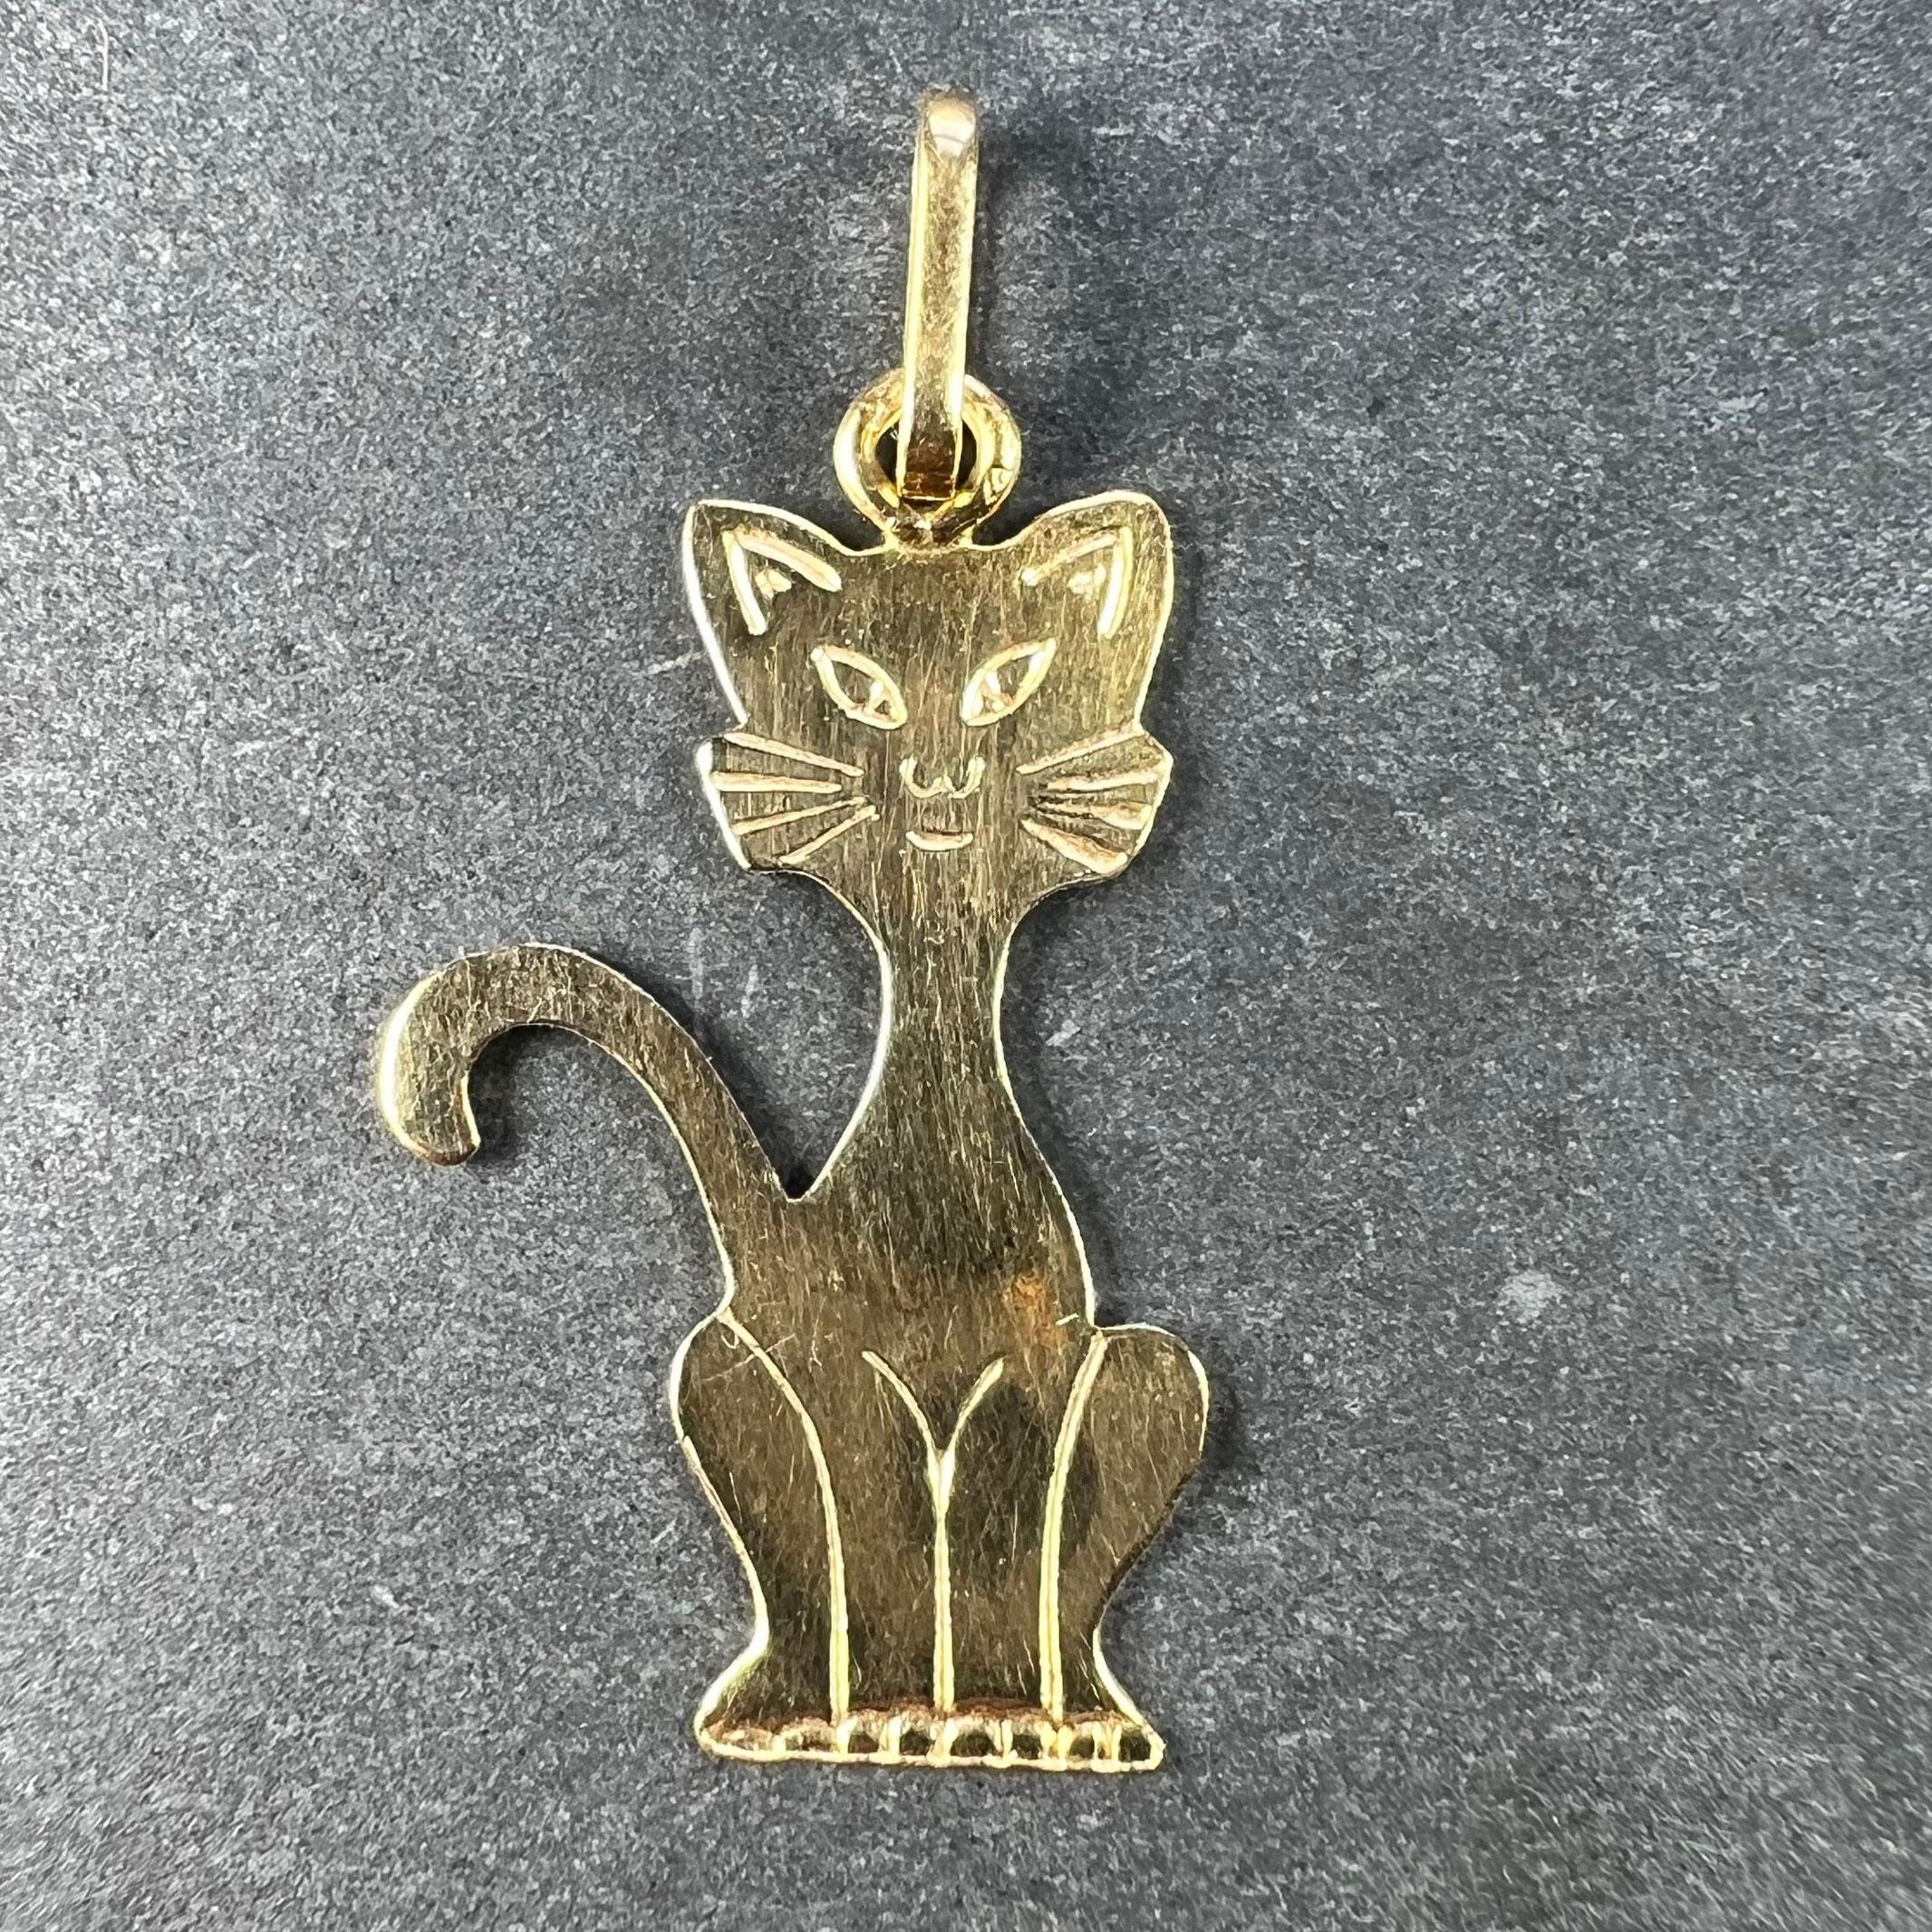 A French 18 karat (18K) yellow gold charm pendant designed as an engraved cat sitting on its haunches with its tail aloft. Stamped with the eagle's head for French manufacture and 18 karat gold.

Dimensions: 2.2 x 1.3 x 0.05 cm (not including jump